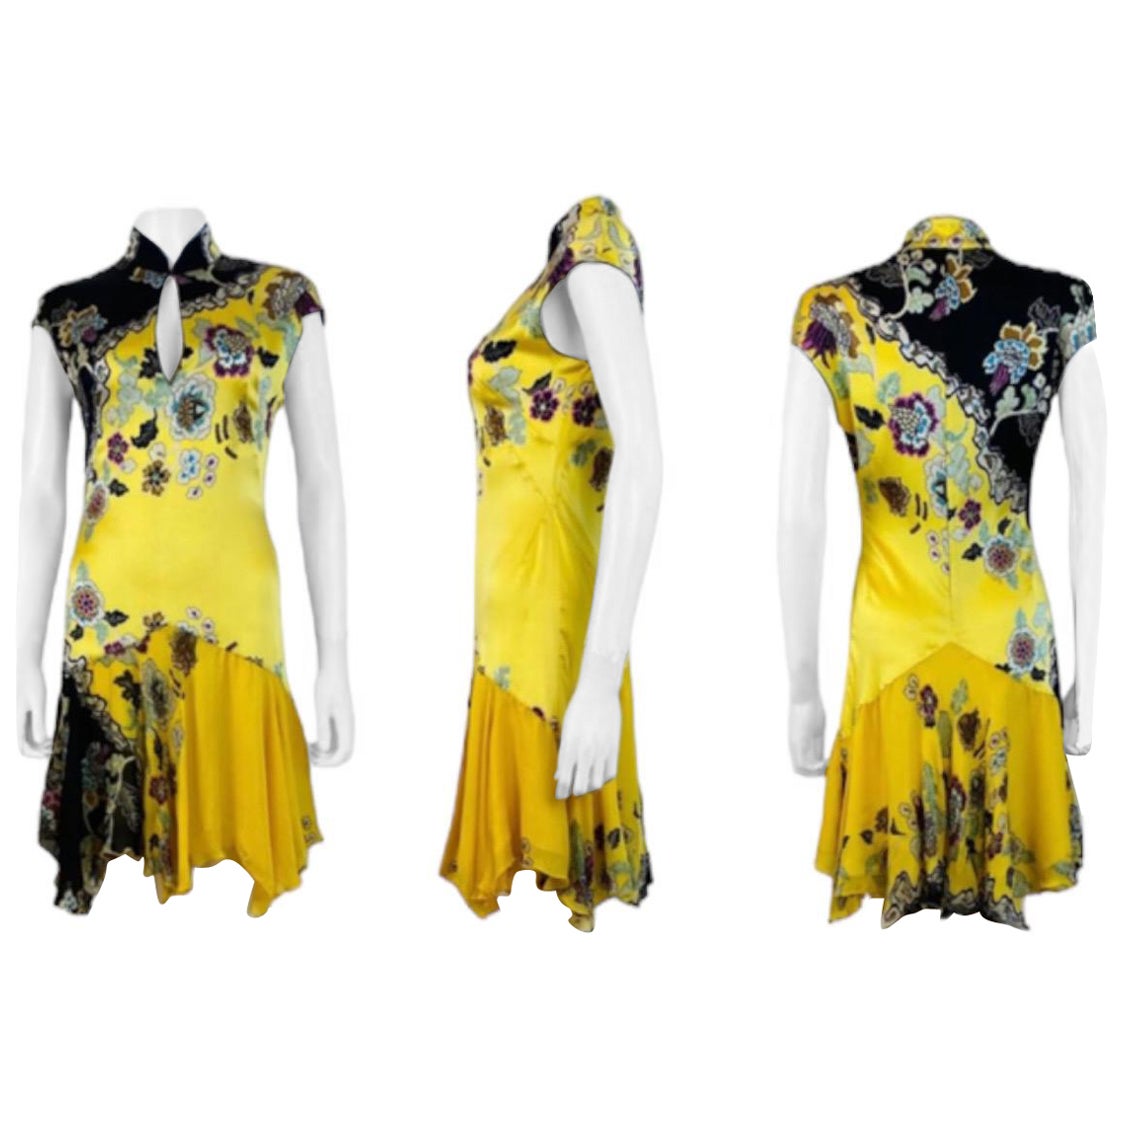 Incredible S/S 2003 Roberto Cavalli Dress
Chinoiserie collection
Bright yellow stretch silk fabric with oversized bold floral print with gold glitter painted style accents
Cheongsam qipao style neckline with hook closure at the front of the